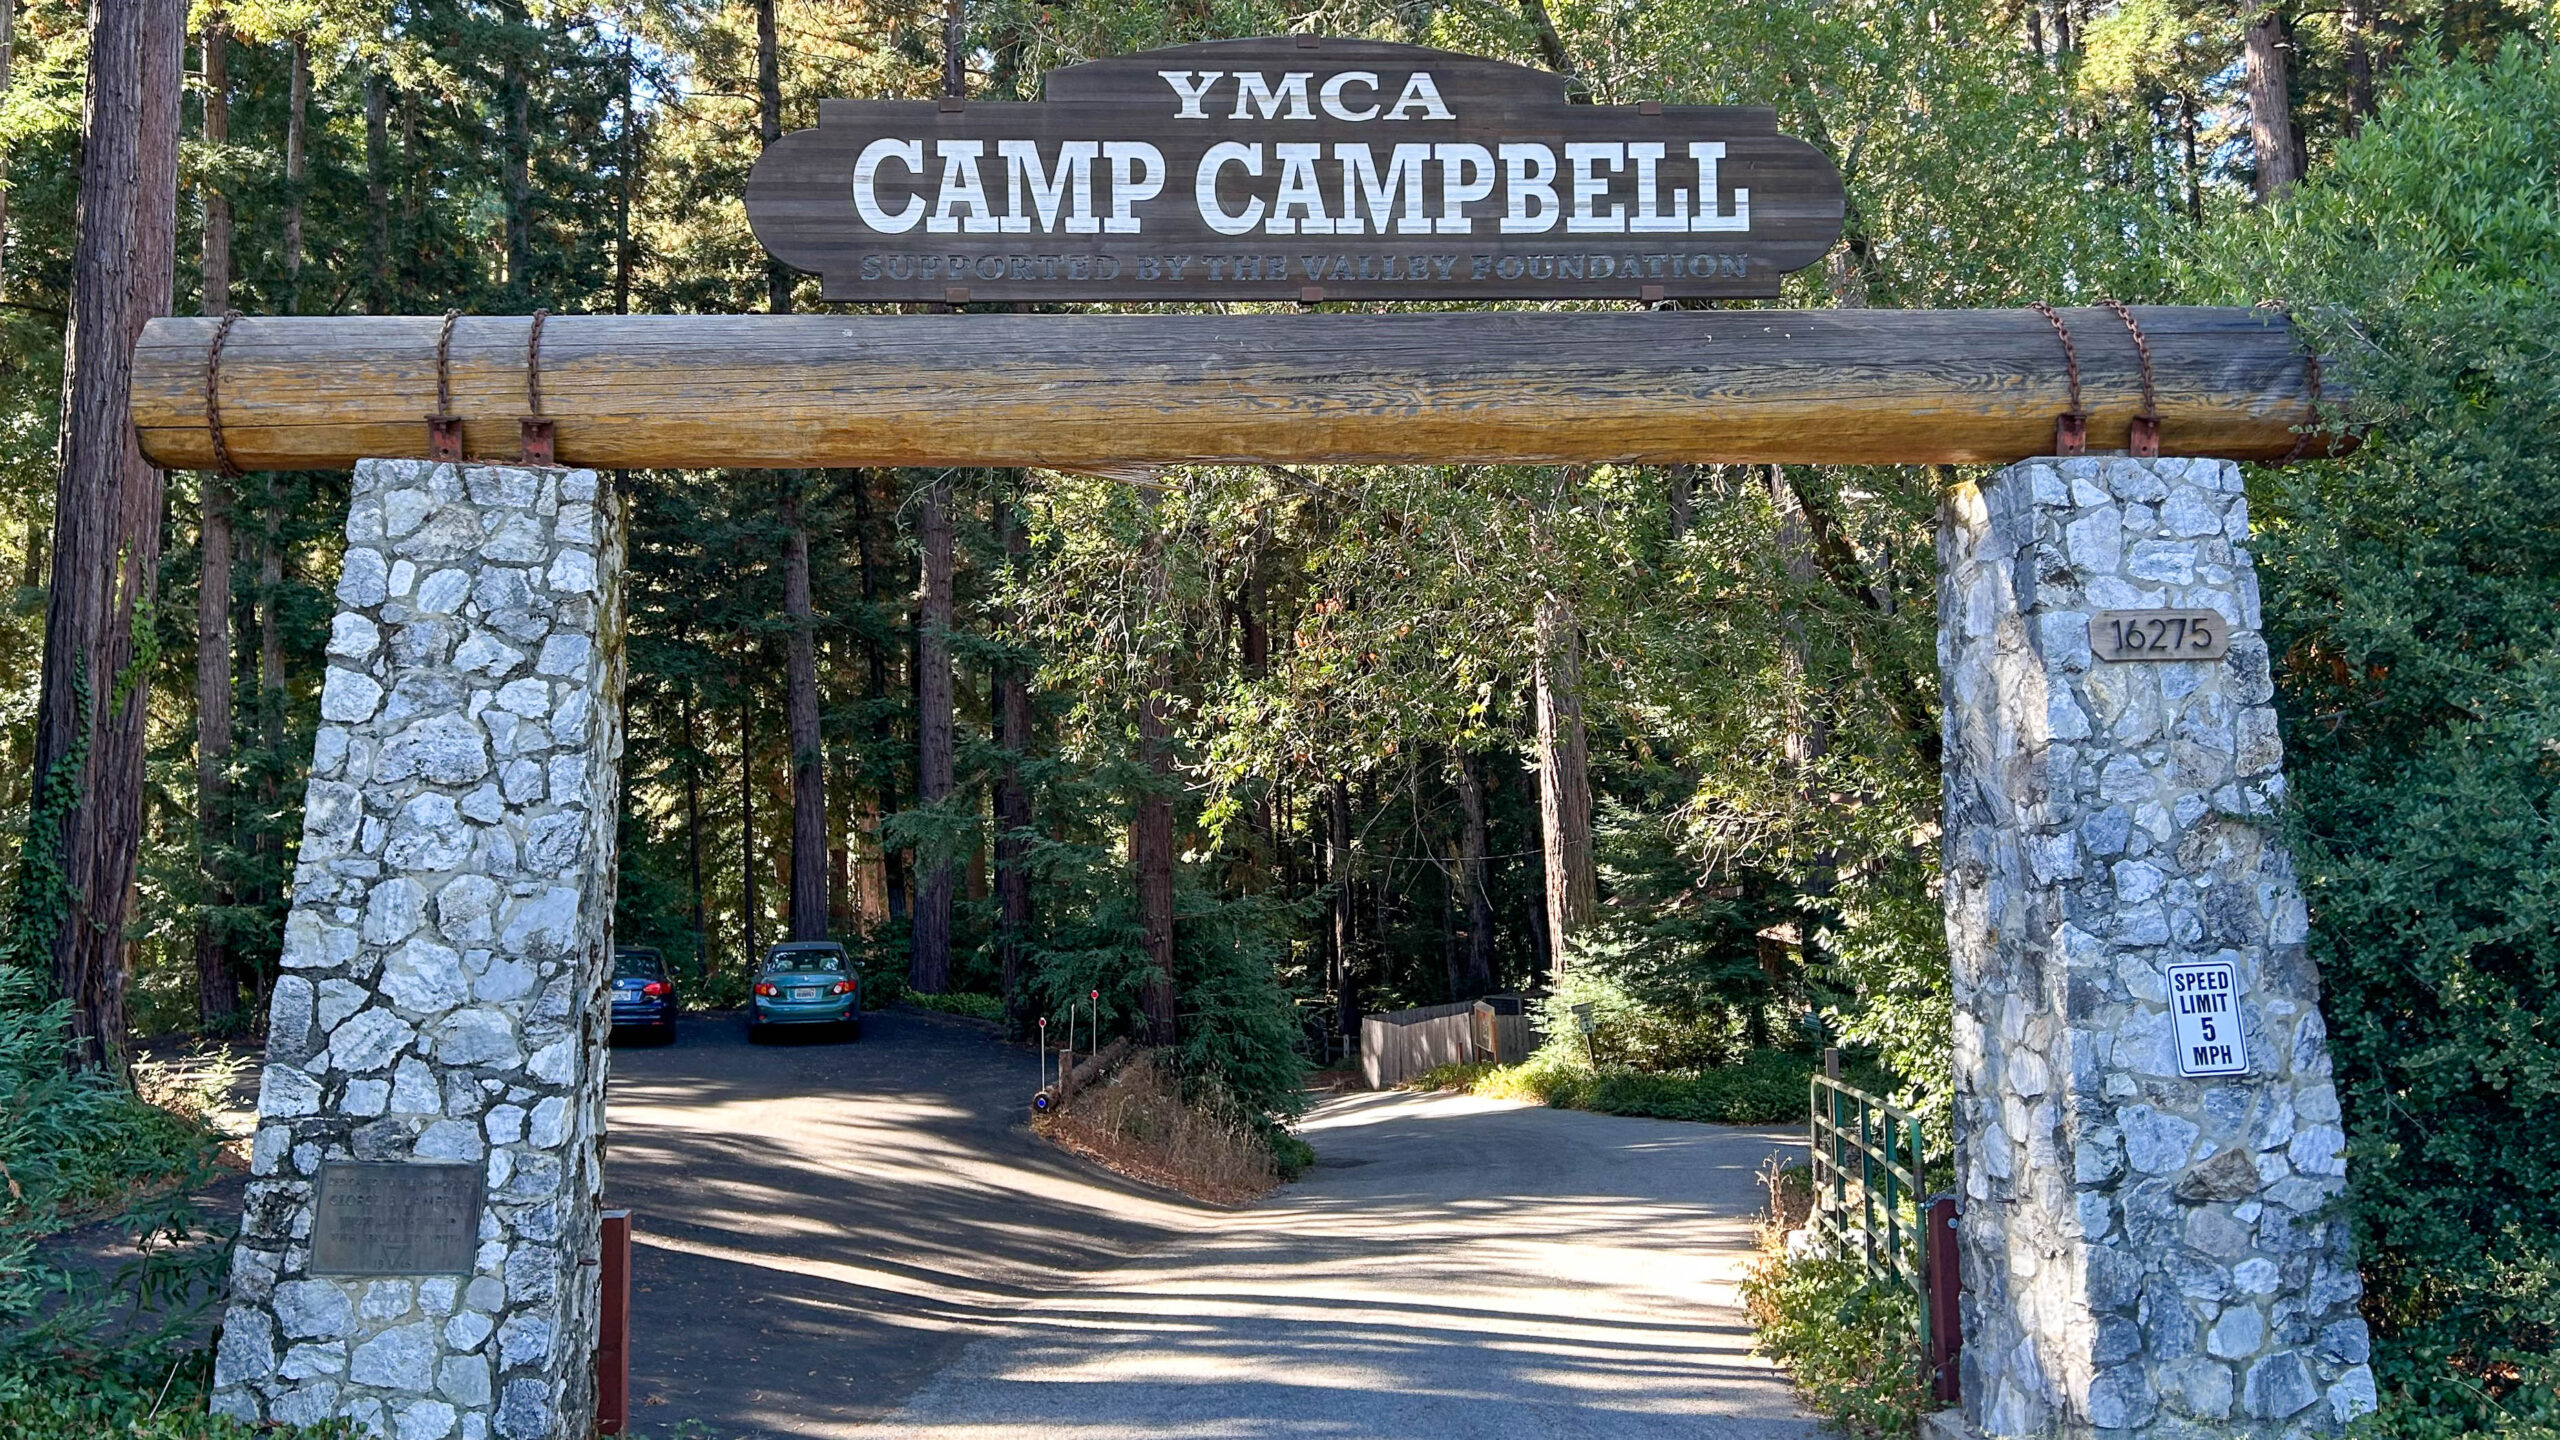 The entrance to YMCA Camp Campbell in Boulder Creek is a stone and wood arch. A road winds into the redwood forest.